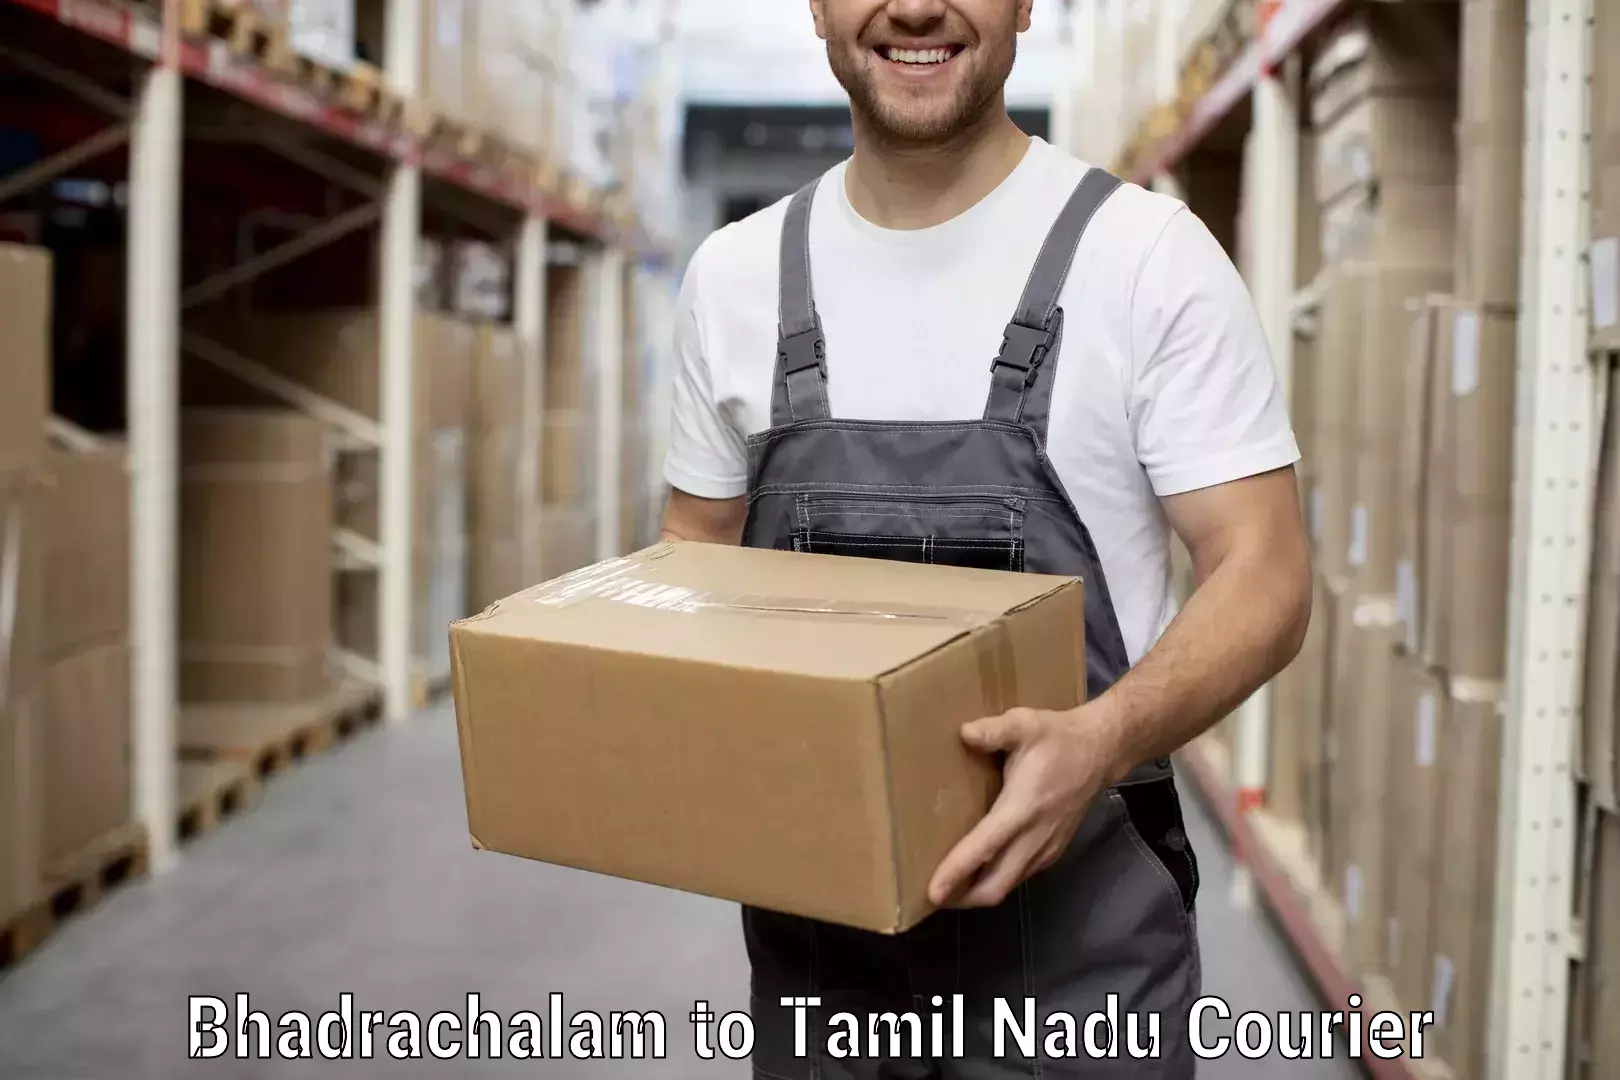 Quality moving services Bhadrachalam to Trichy